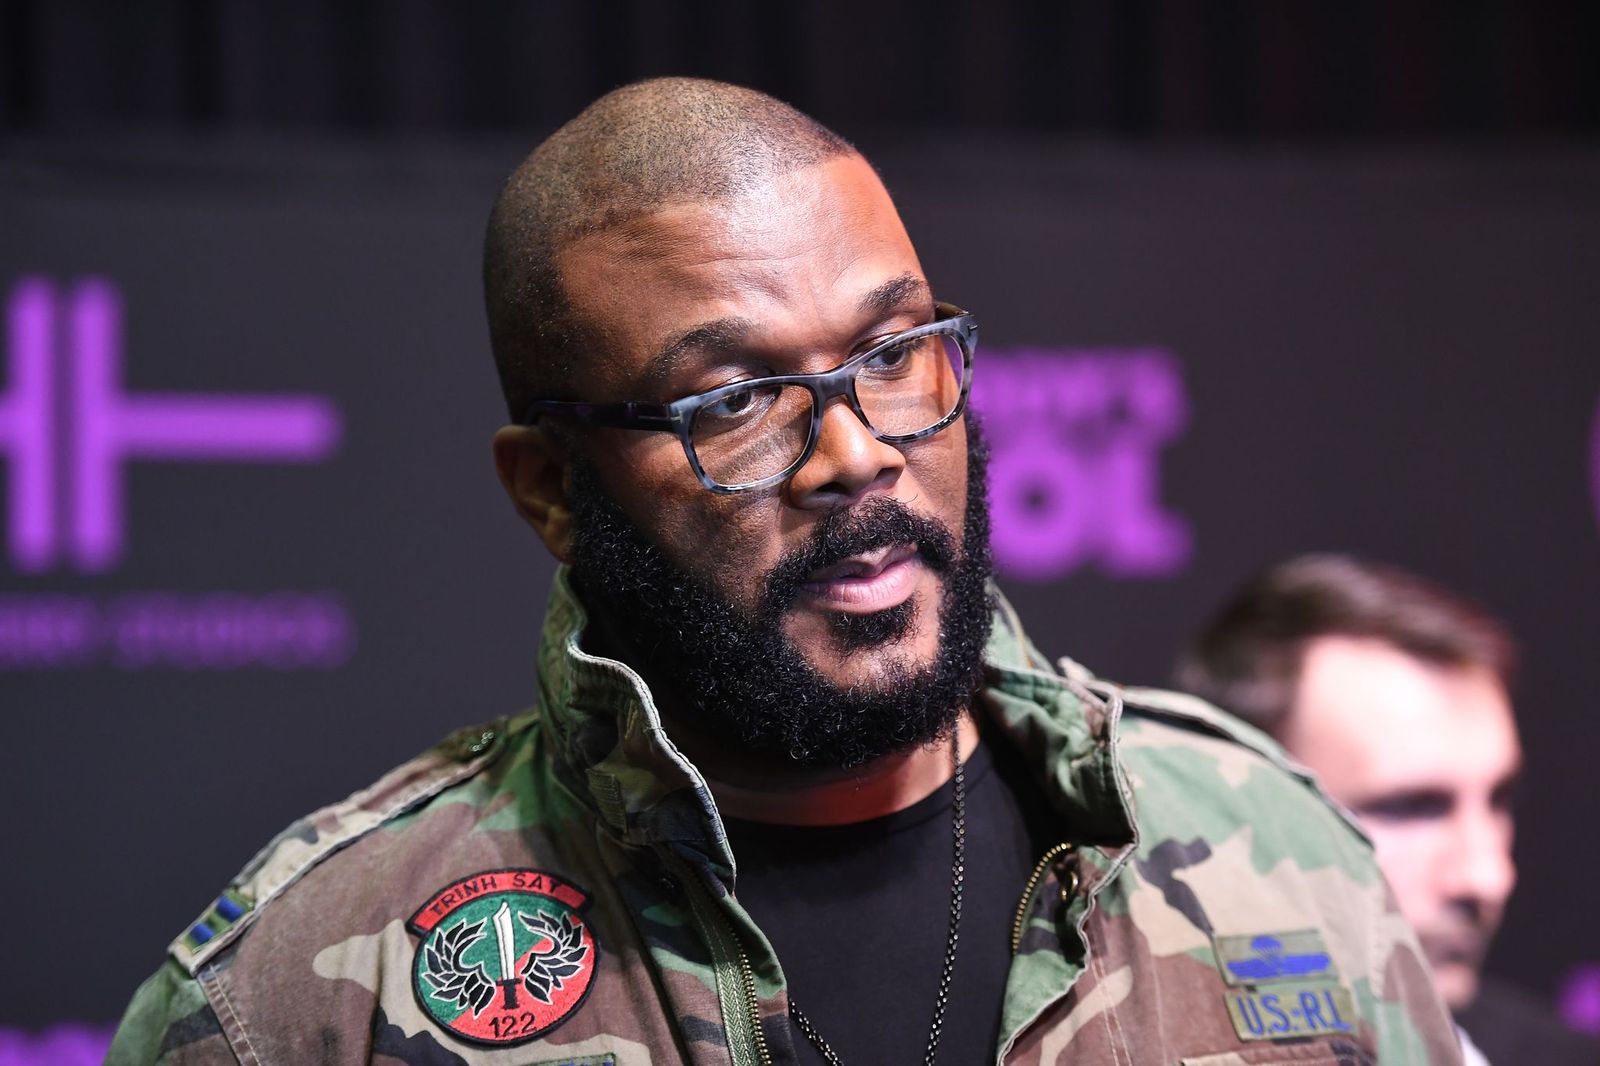  Tyler Perry at the "Nobody's Fool" Atlanta screening in November 2018 | Source: Getty Images